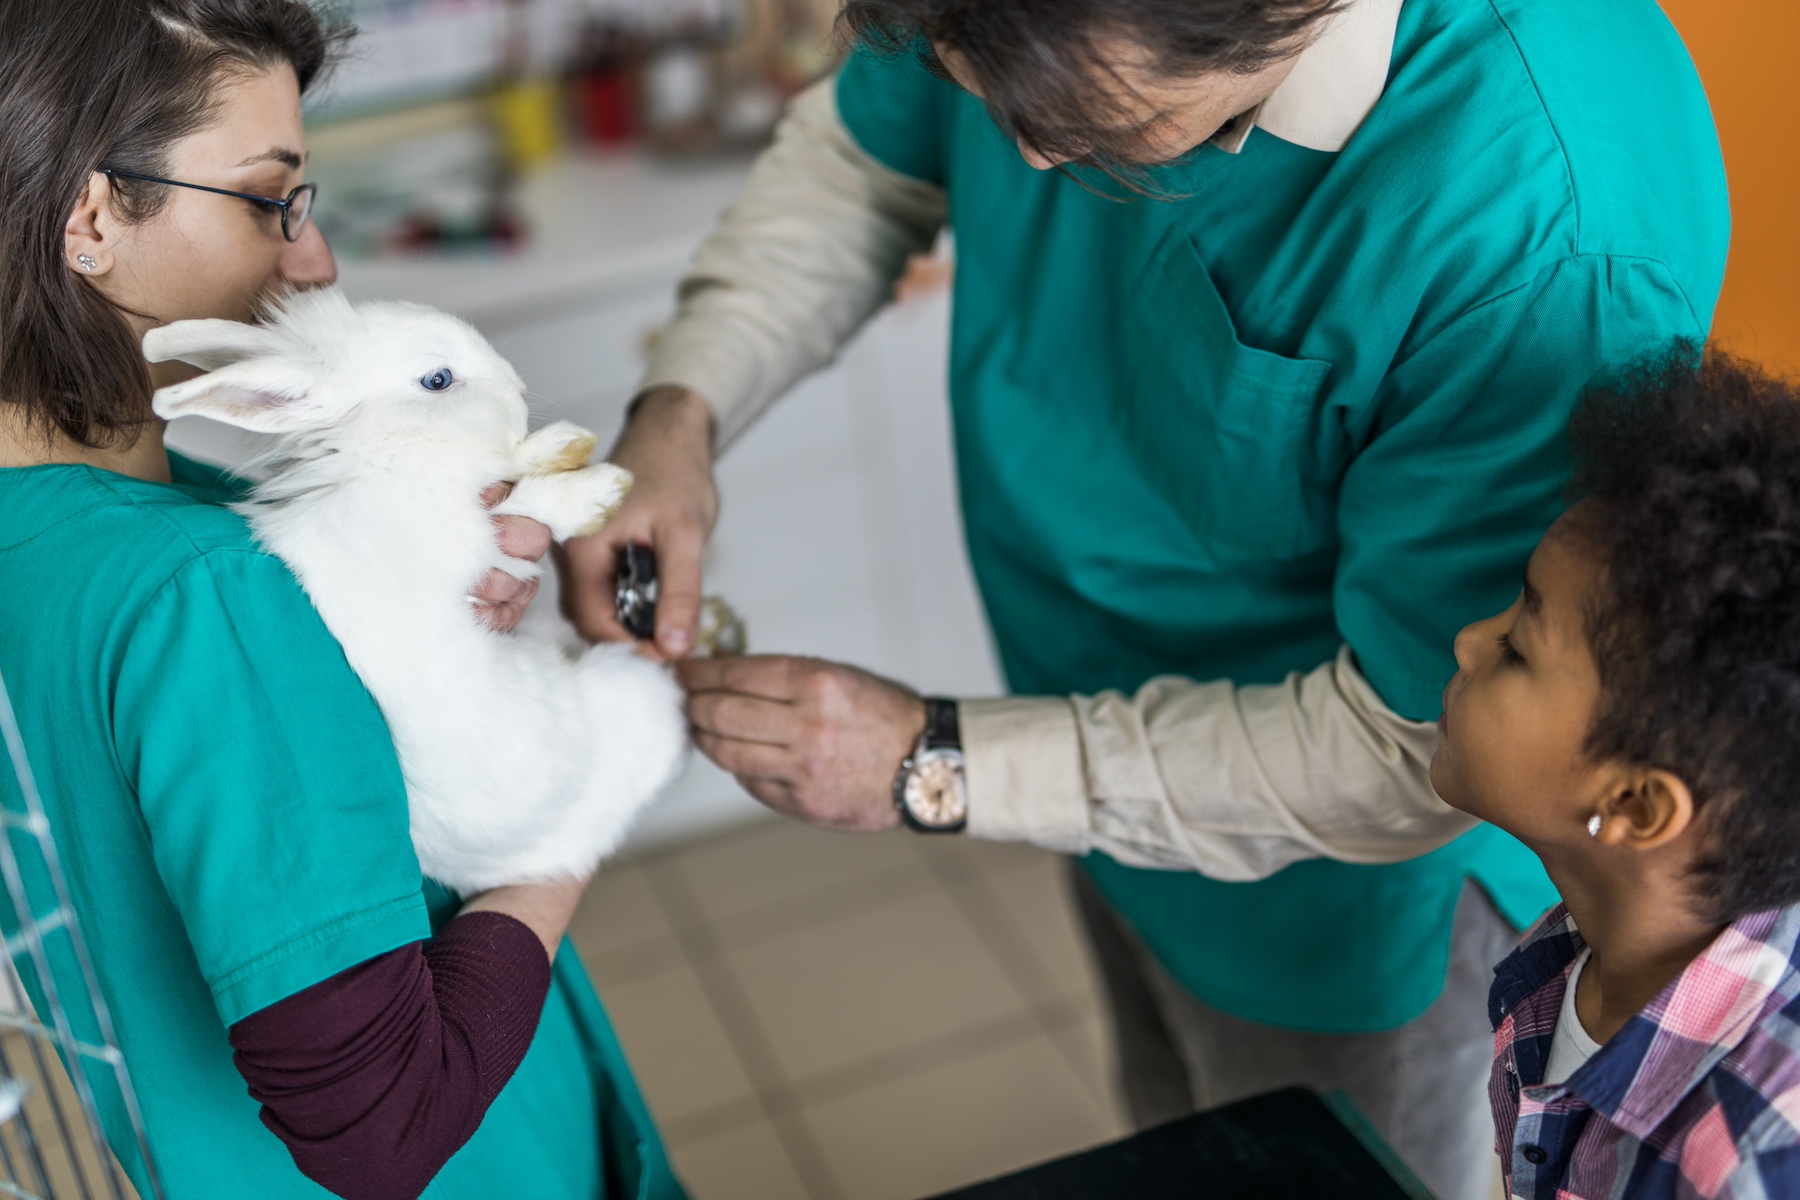 Two veterinarians work together to trim the nails of a little girl's pet rabbit